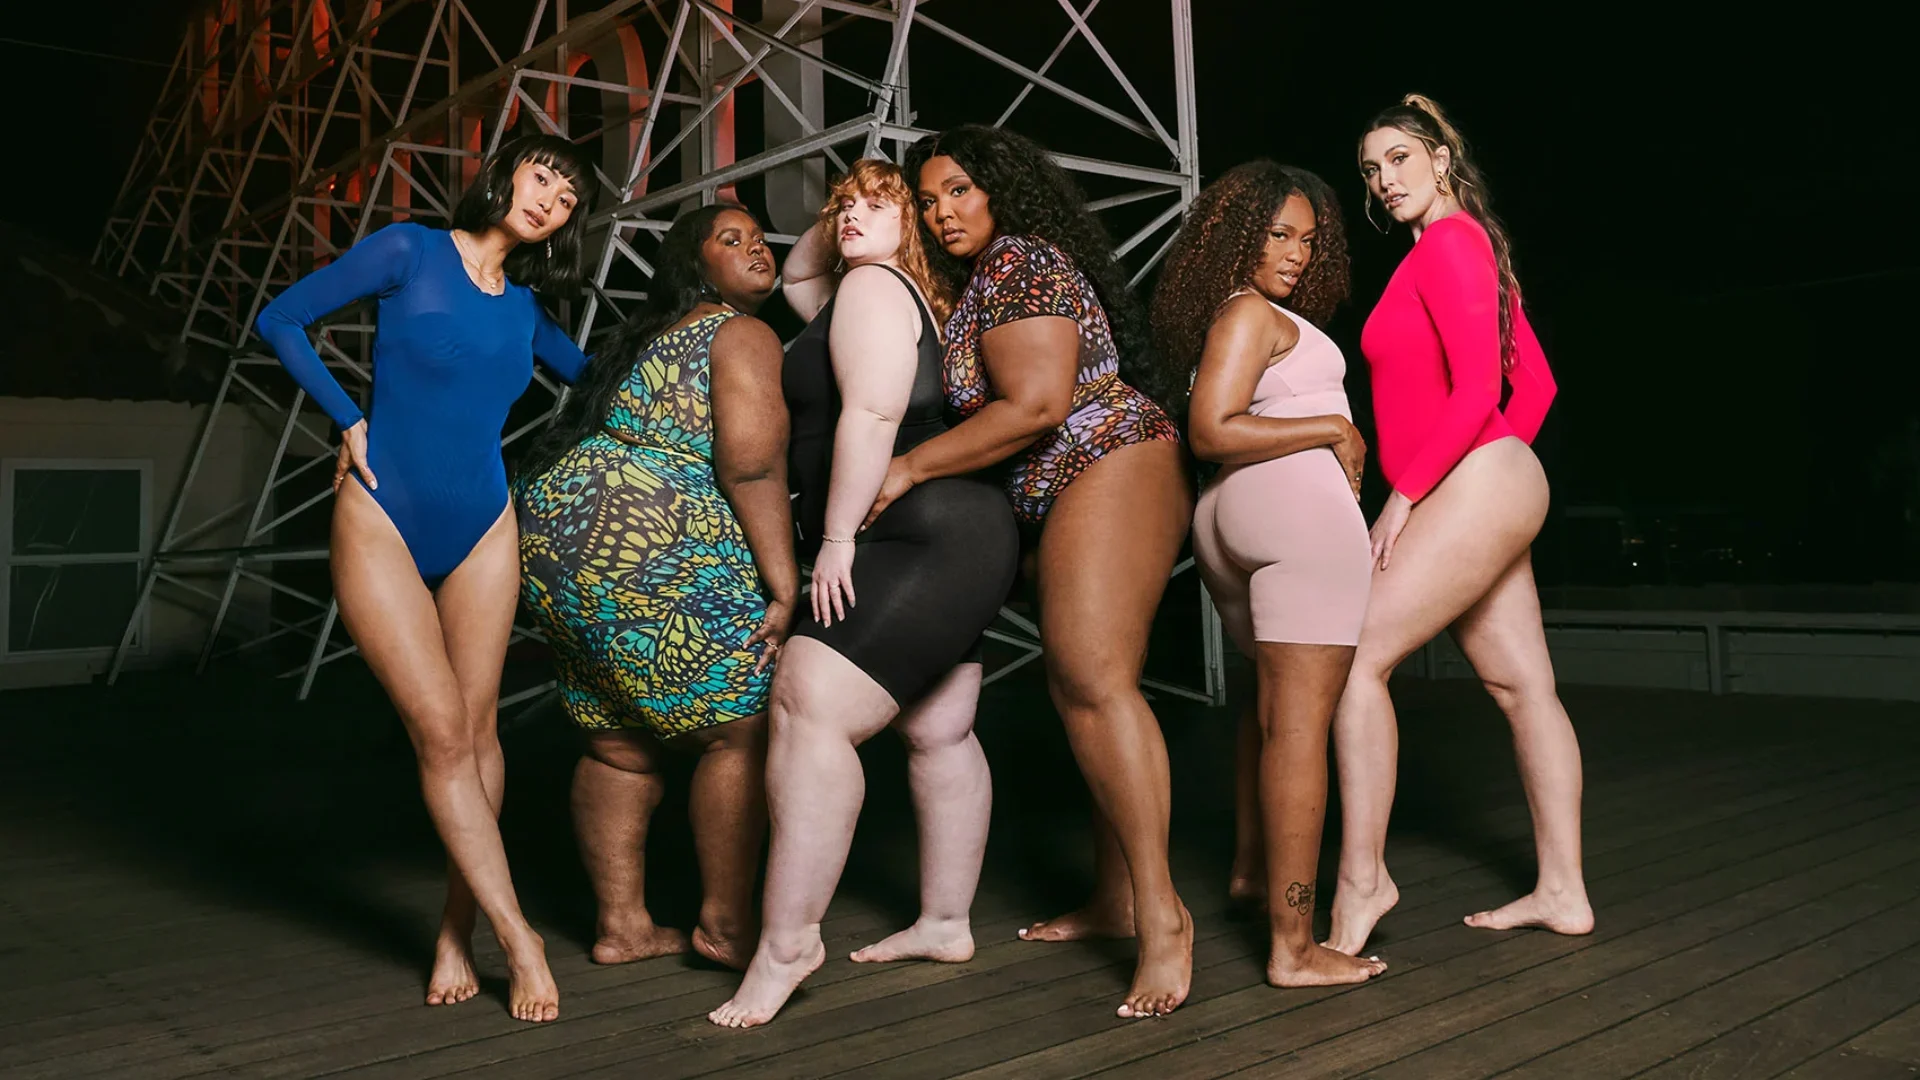 New Drop! Lizzo Flashes Her Thong in New Yitty Jumpsuit